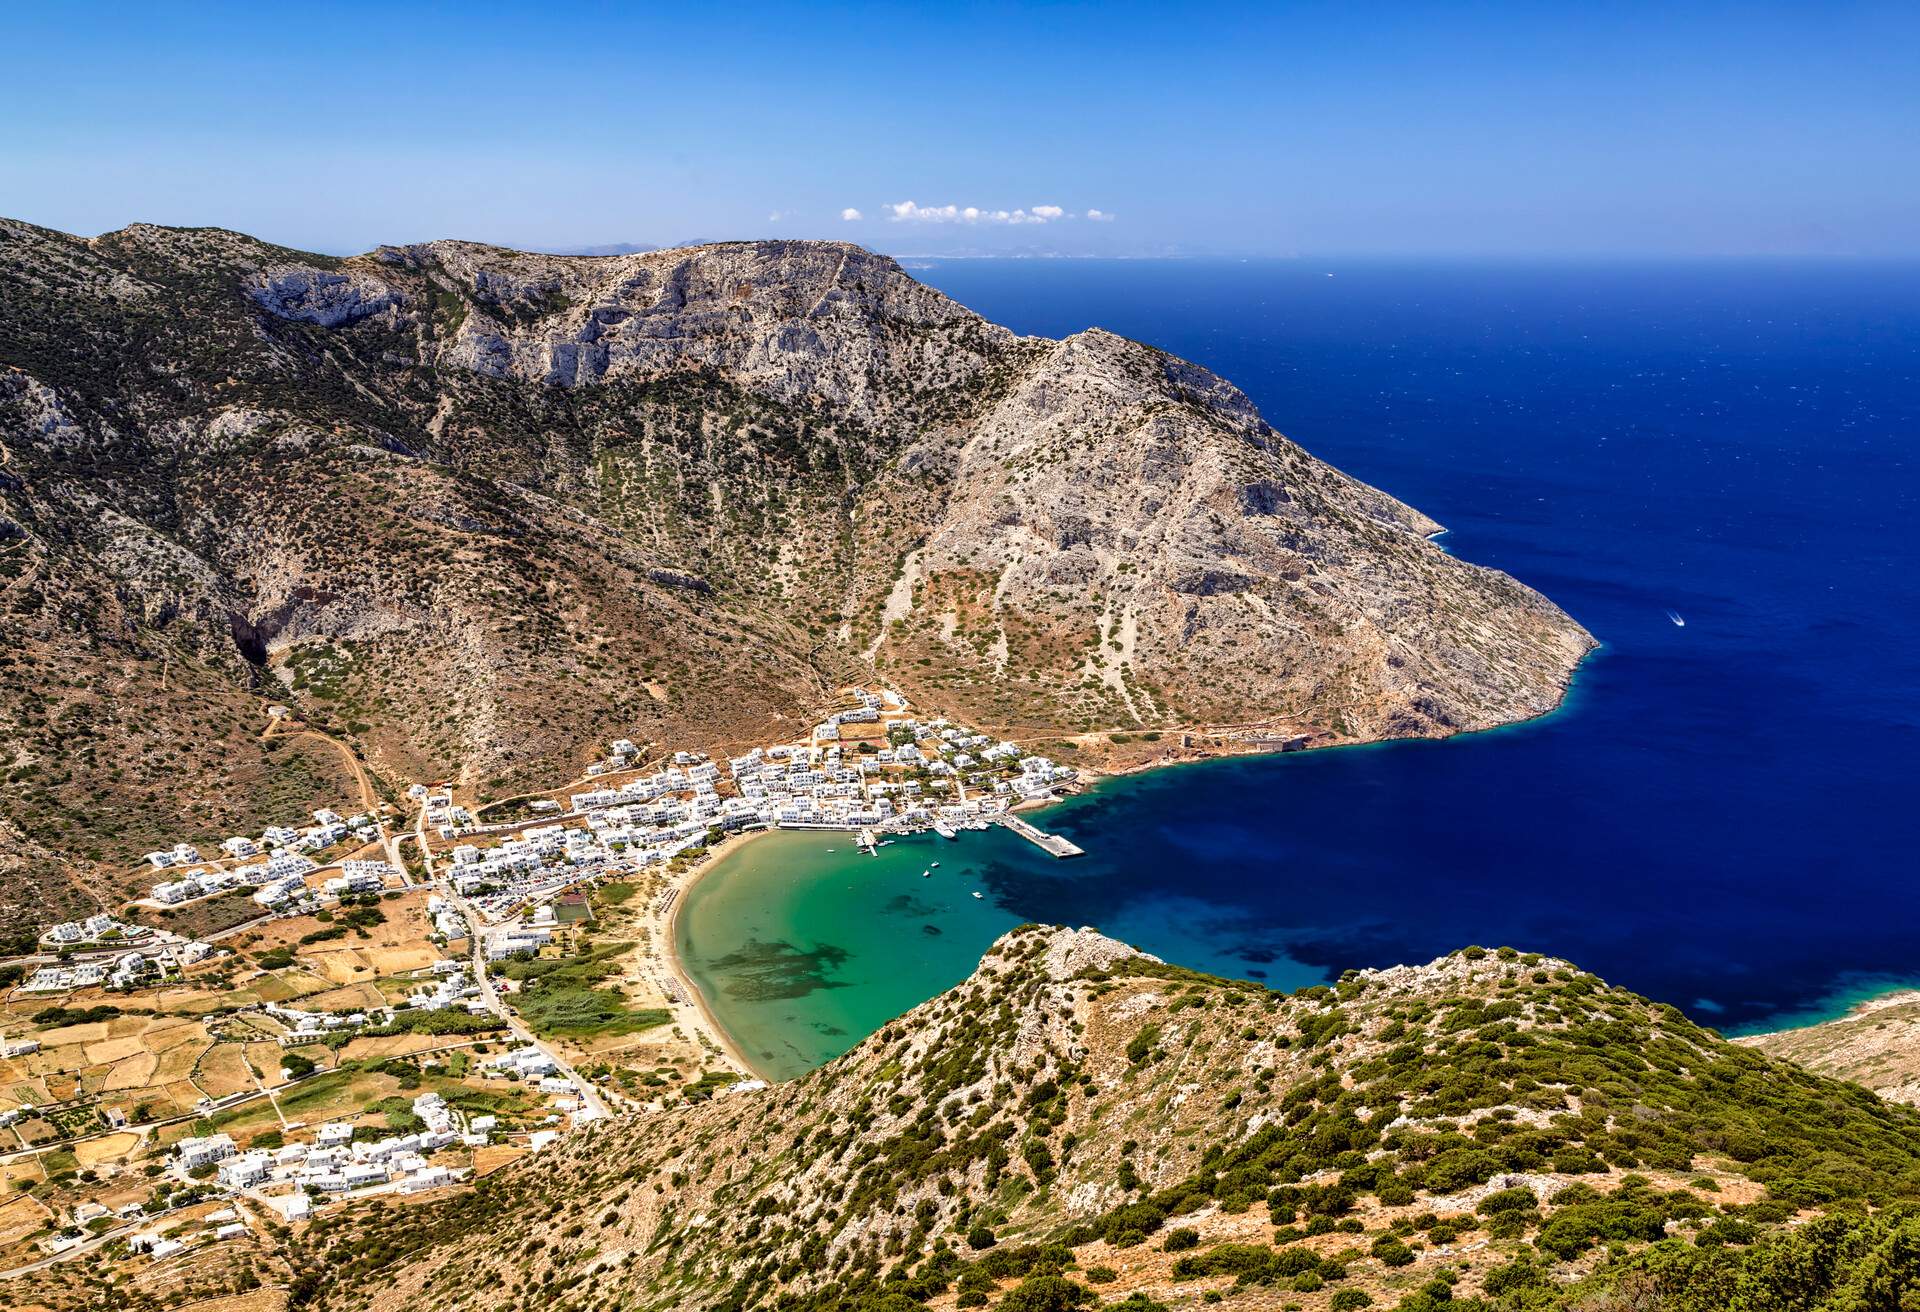 View of the port of Sifnos from the hill where the Agios Symeon church is located.